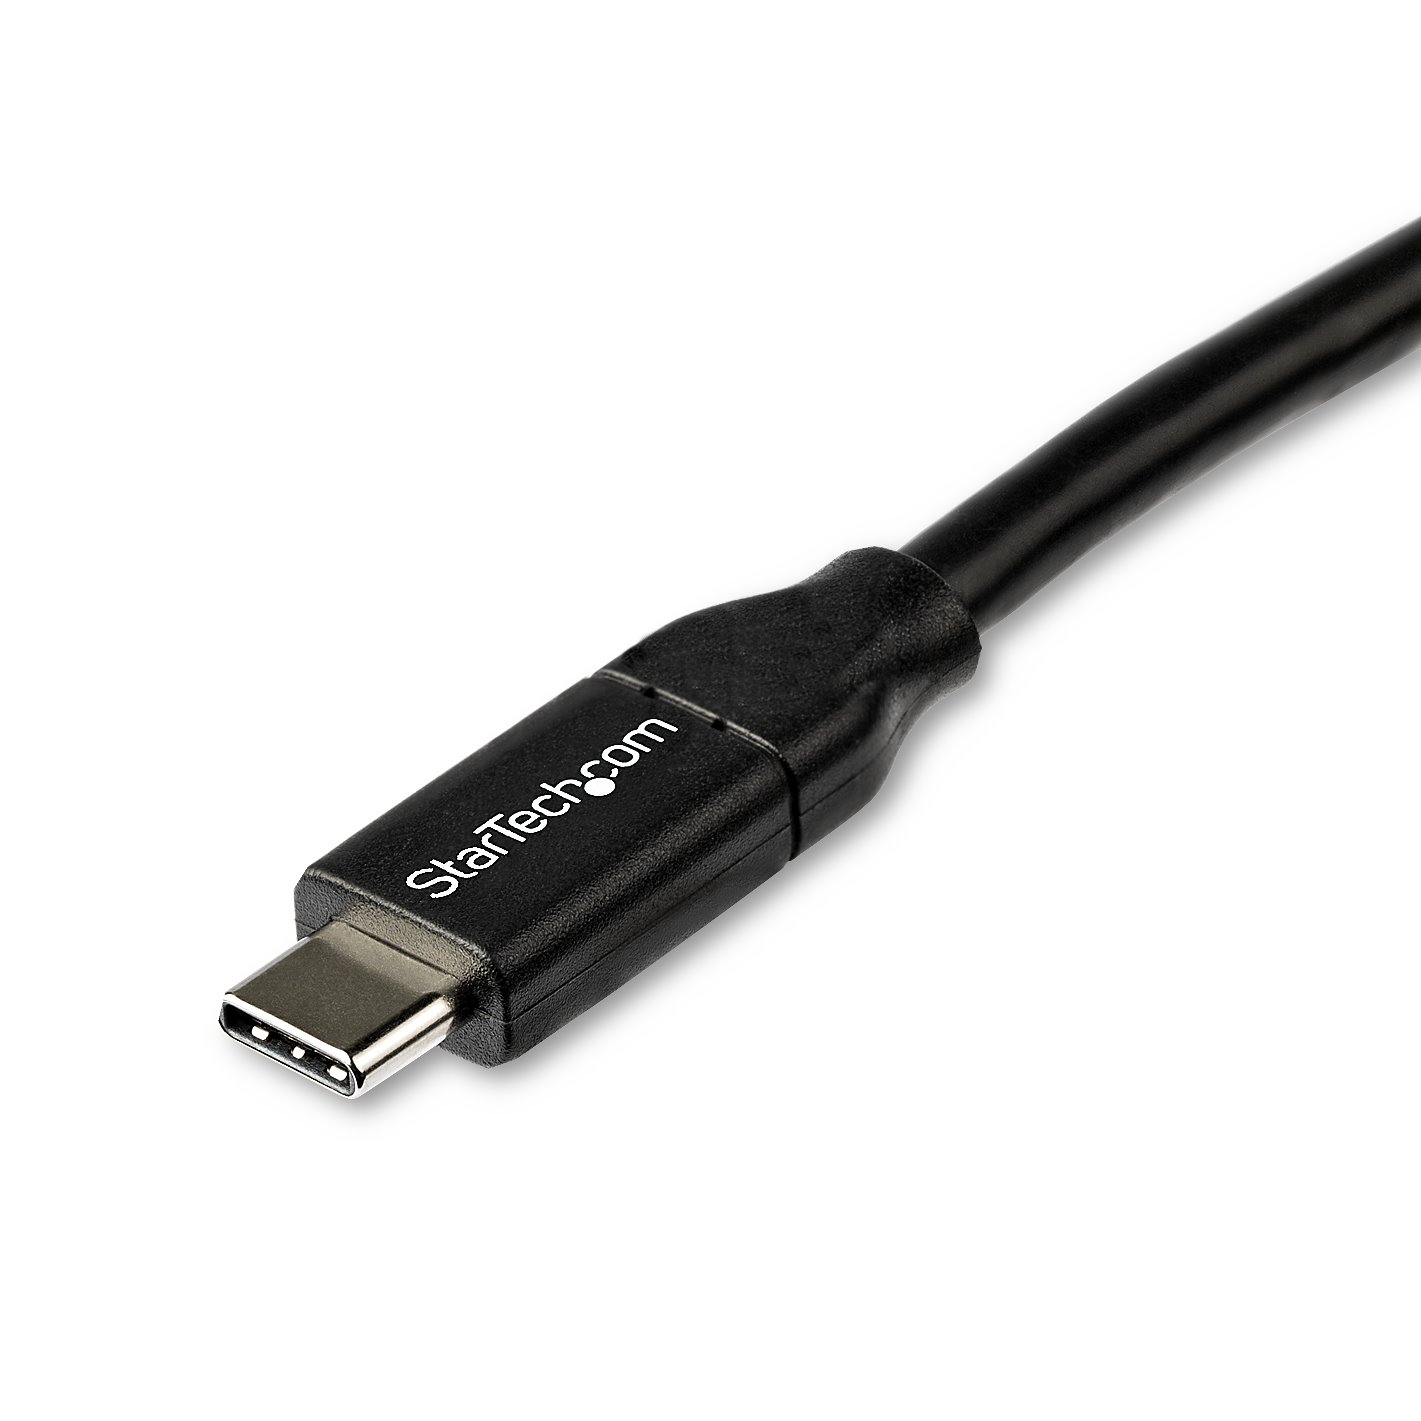 StarTech.com USB C to USB Cable - 6 ft / 2m - USB A to C - USB 2.0 Cable -  USB Adapter Cable - USB Type C - USB-C Cable - USB2AC2M - USB Cables 